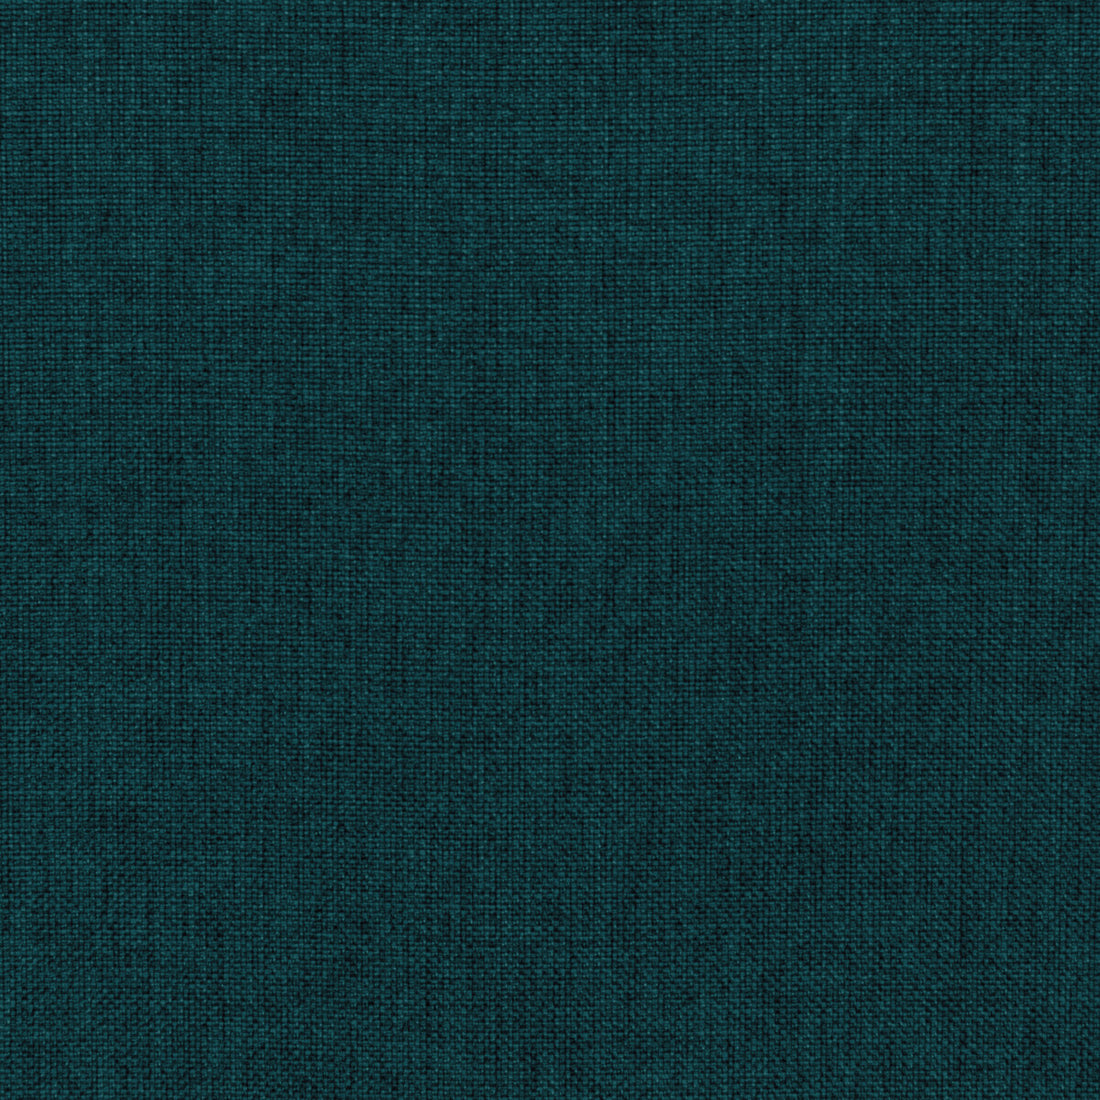 Fortify fabric in neptune color - pattern 36257.5.0 - by Kravet Contract in the Supreen collection